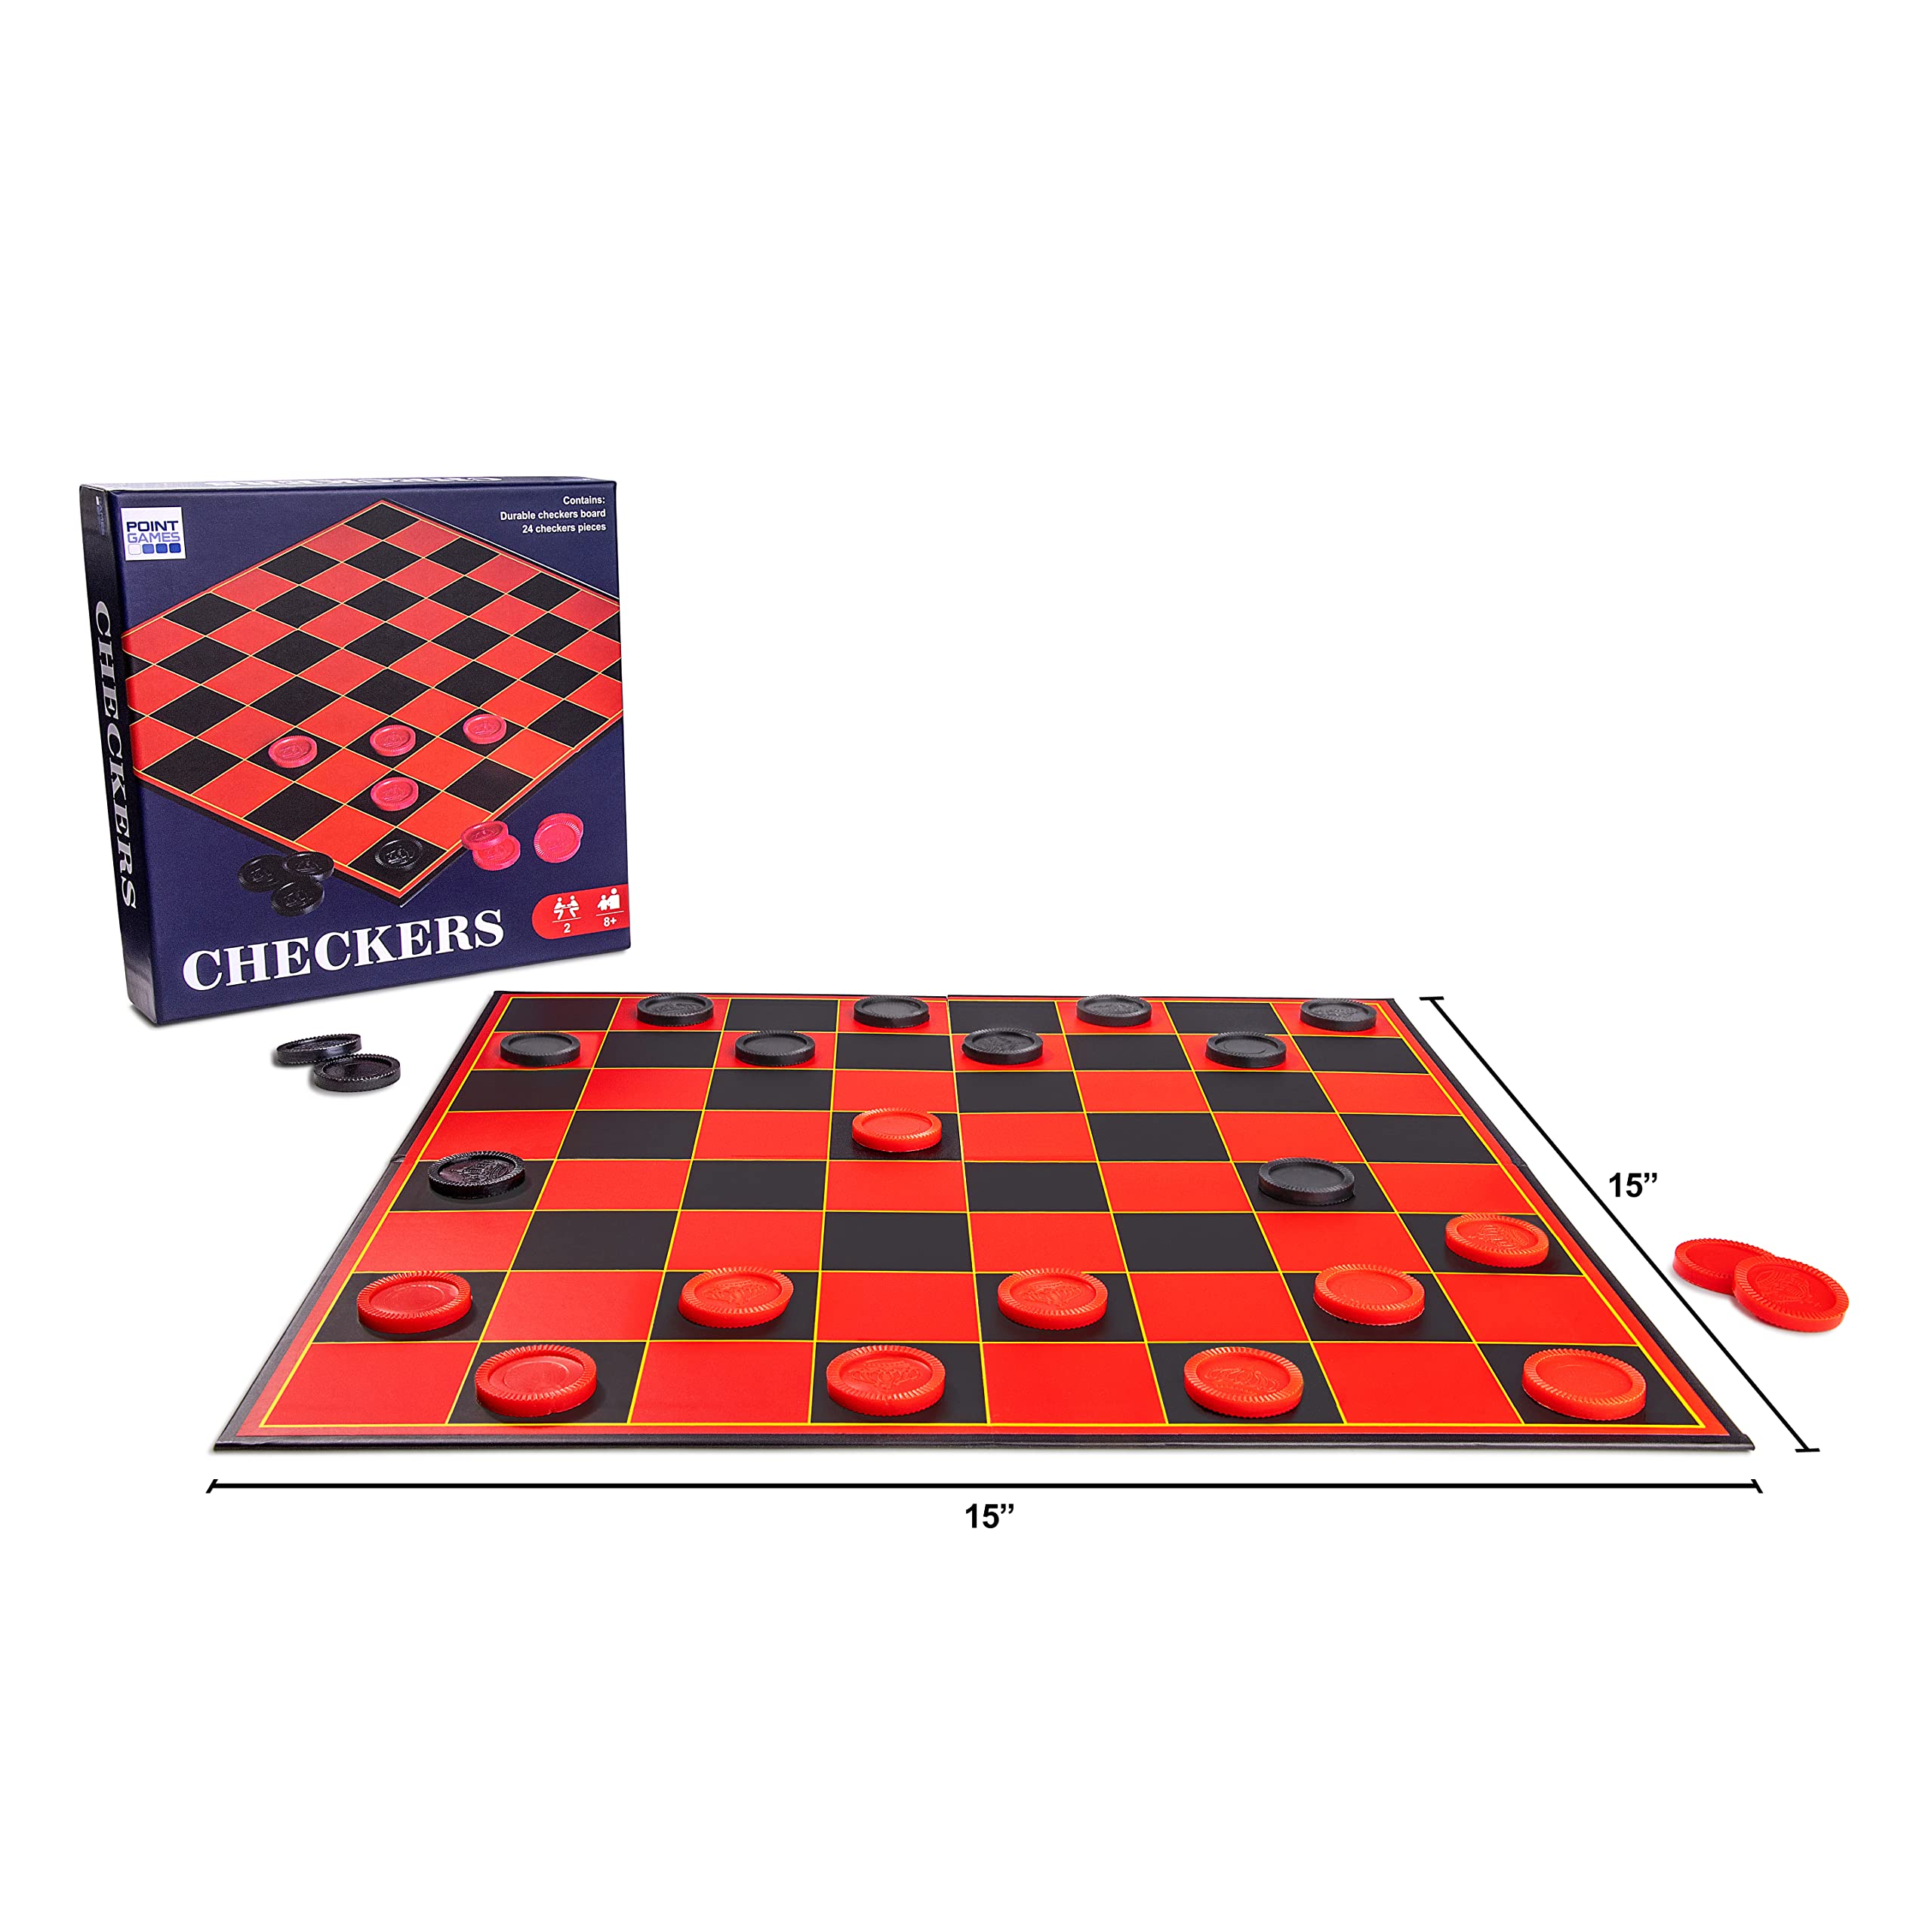 Checkers Board for Kids– Fun Checkerboard Game for Boys and Girls - Interlocking Checkers with Foldable Board by Point Games